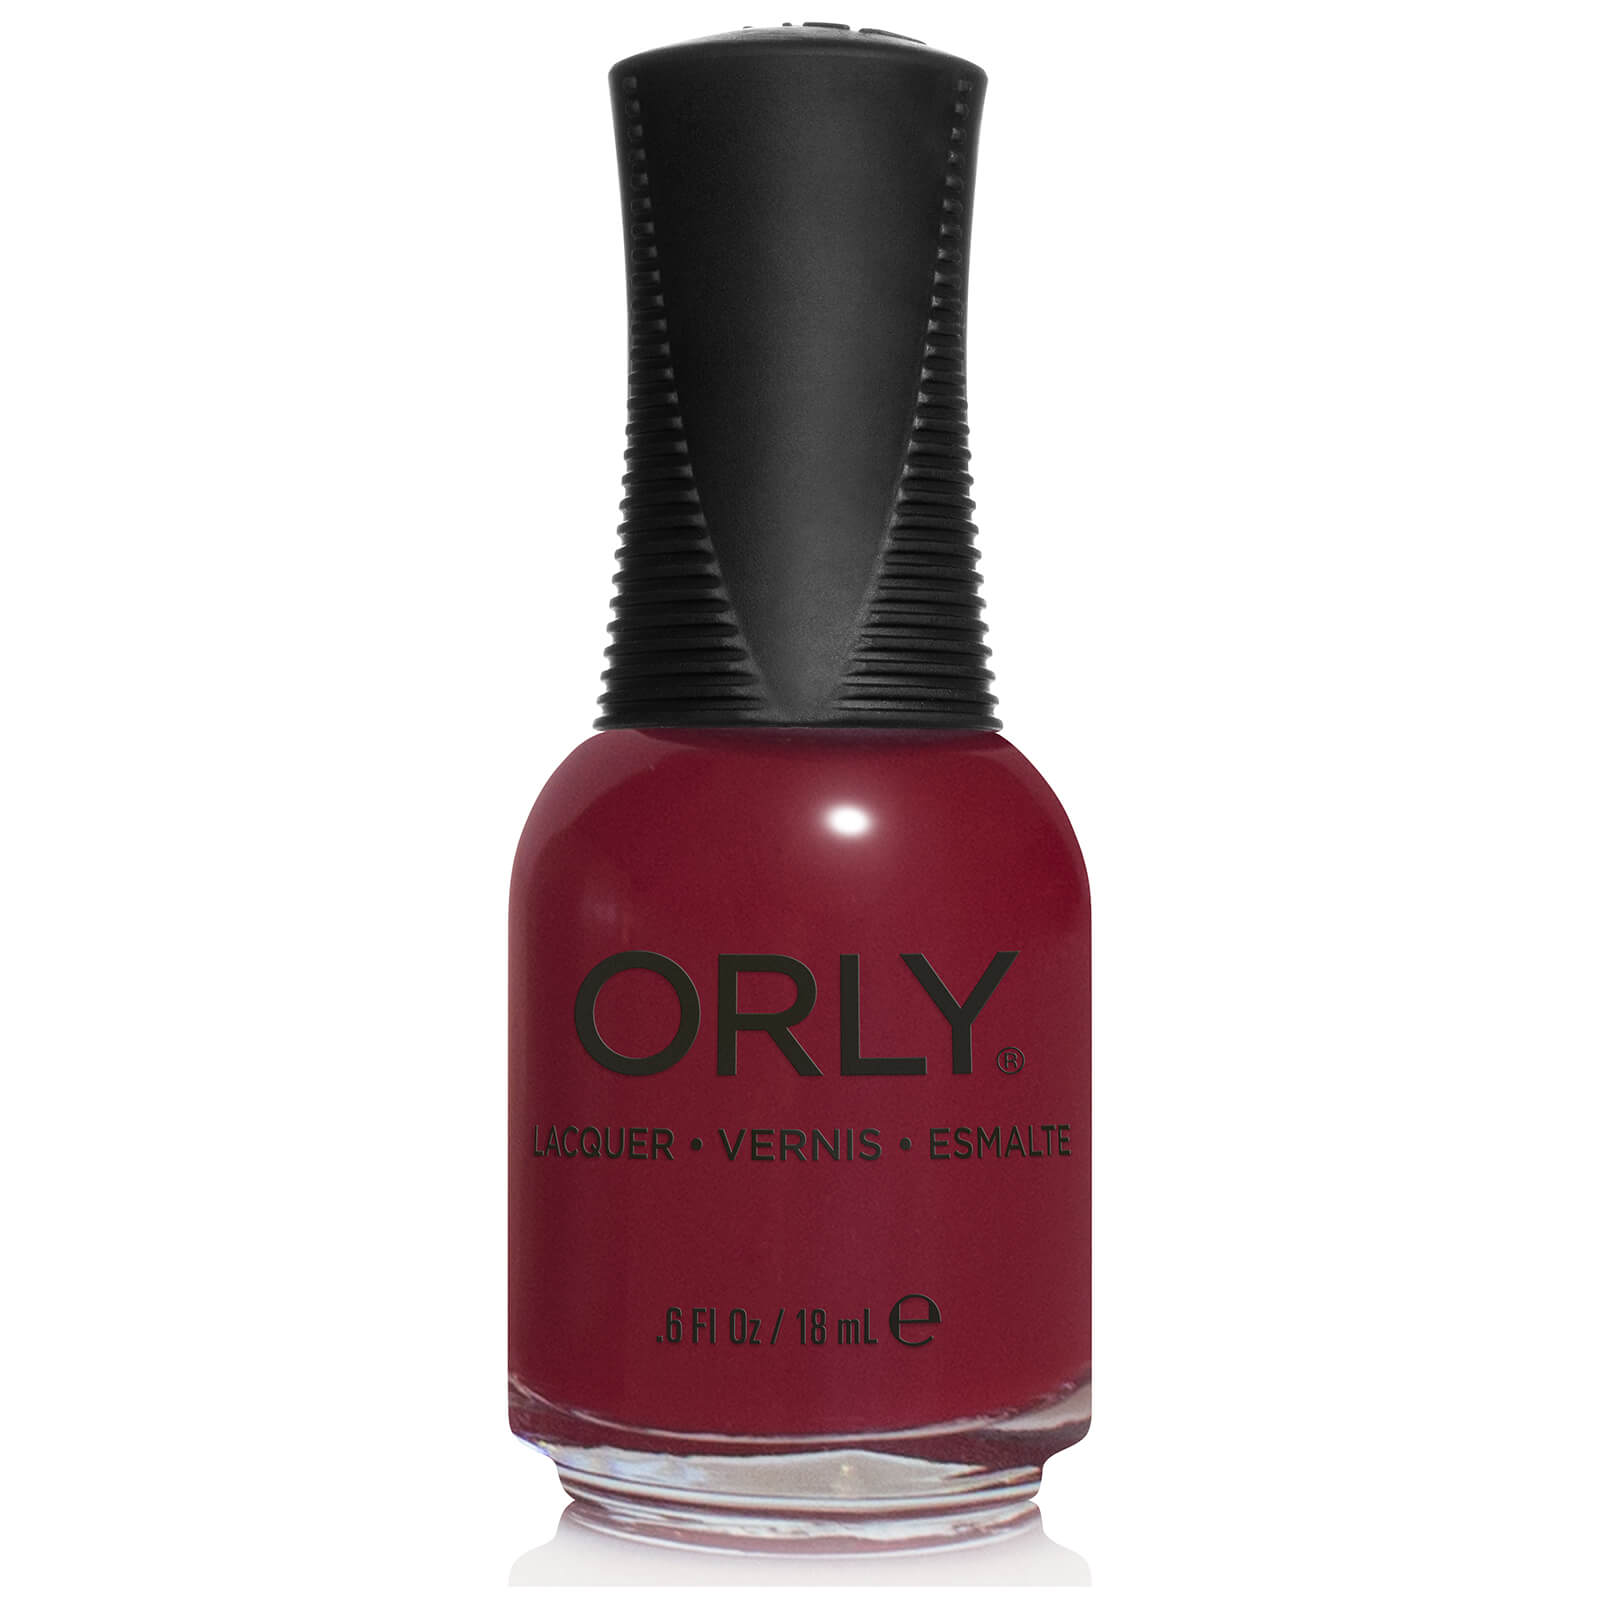 Orly Nail Lacquer 18ml (Various Shades) - Stiletto on the Run